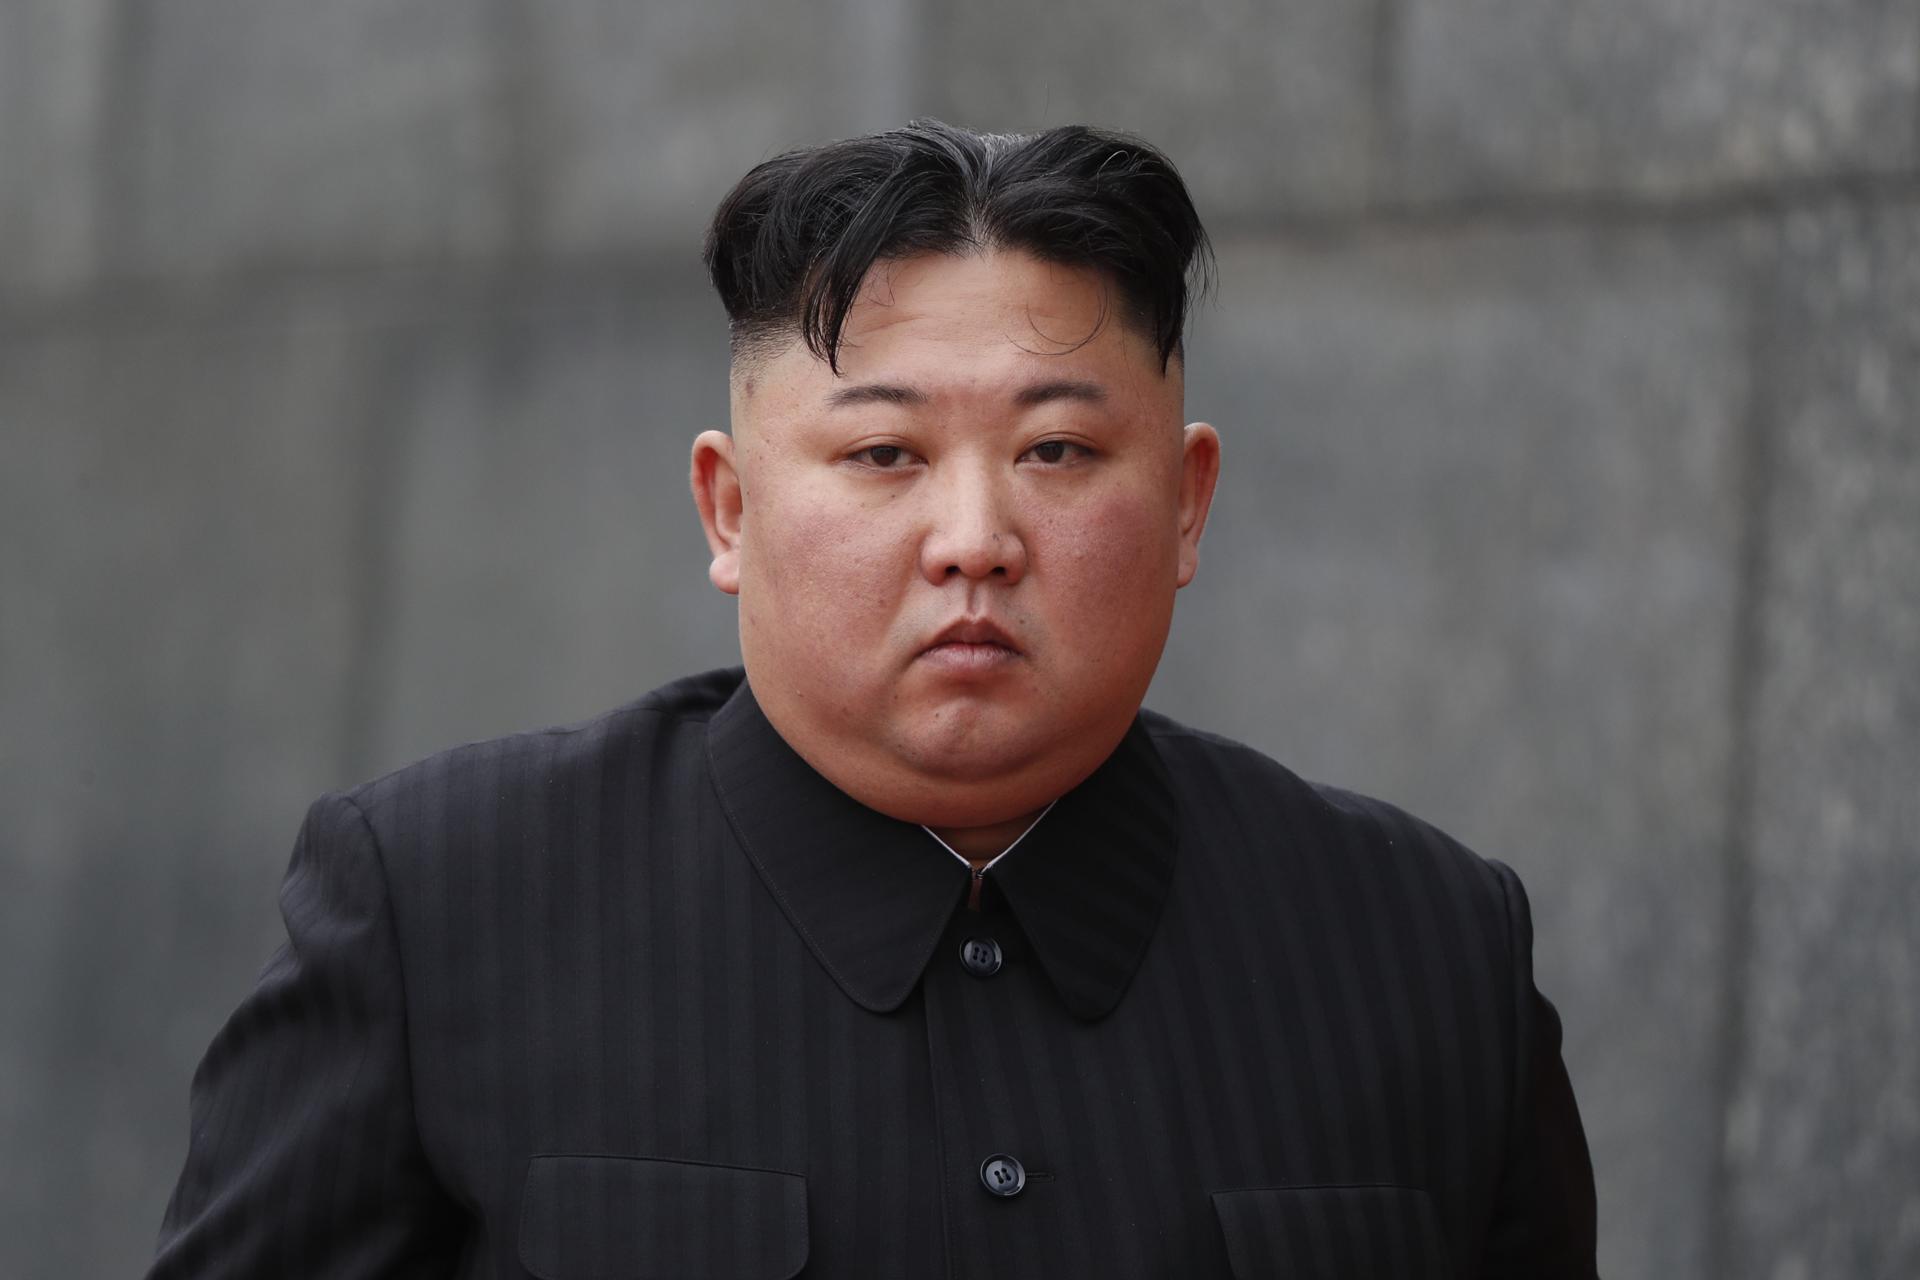 North Korean leader Kim Jong-un attends a wreath laying ceremony at the Ho Chi Minh Mausoleum in Hanoi, Vietnam, 02 March 2019. EFE-EPA FILE/JORGE SILVA/POOL